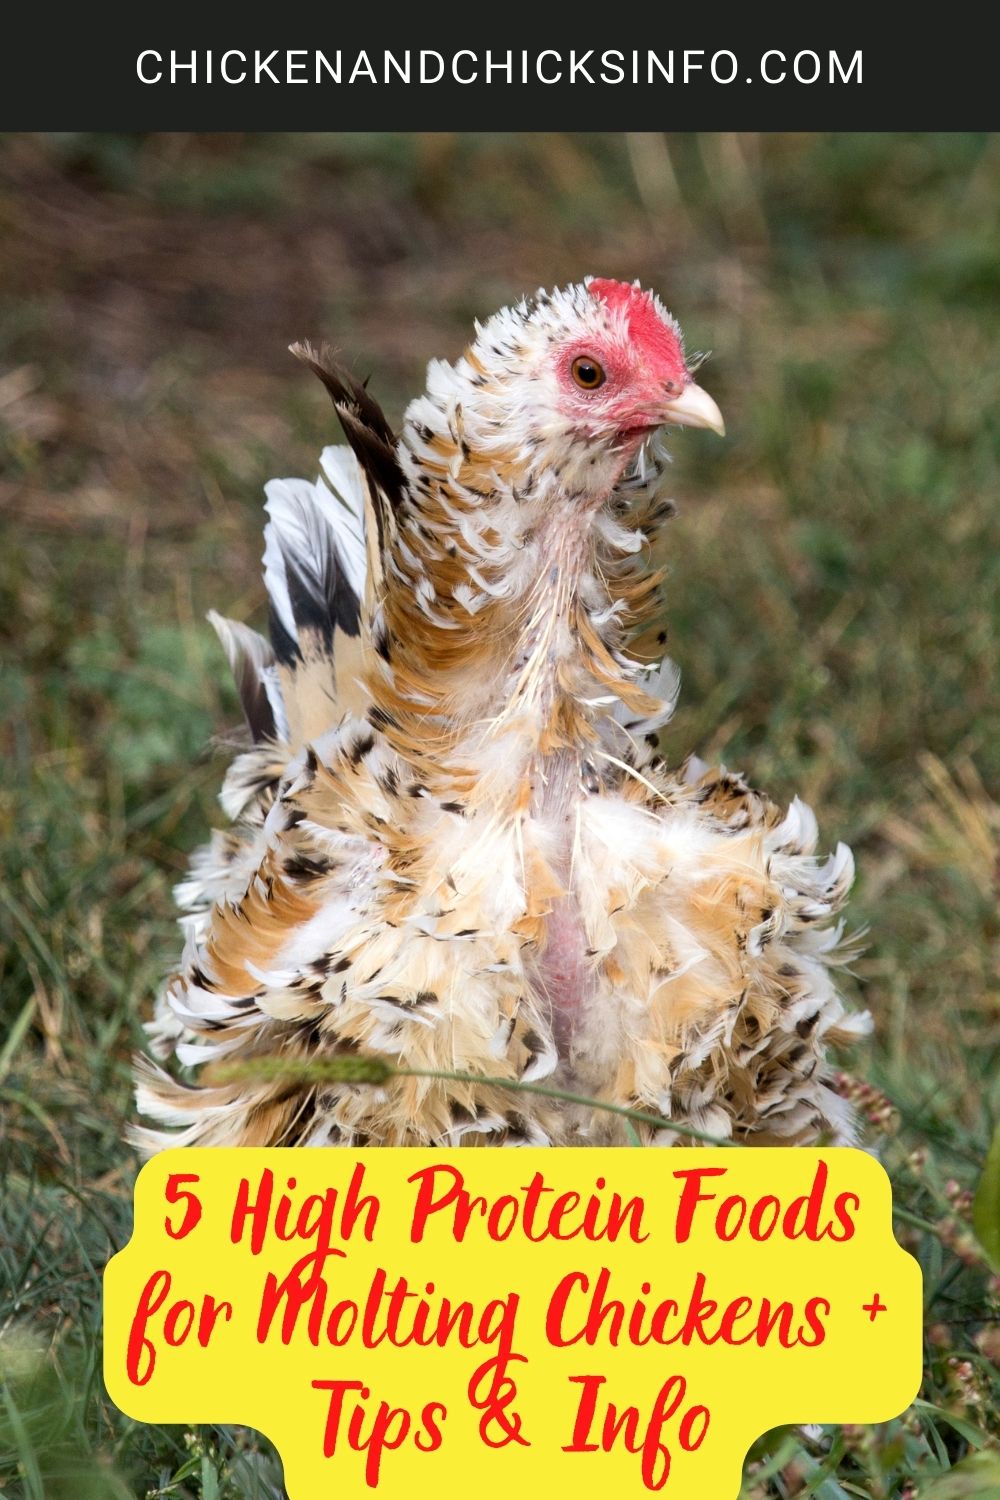 5 High Protein Foods for Molting Chickens + Tips & Info poster.
